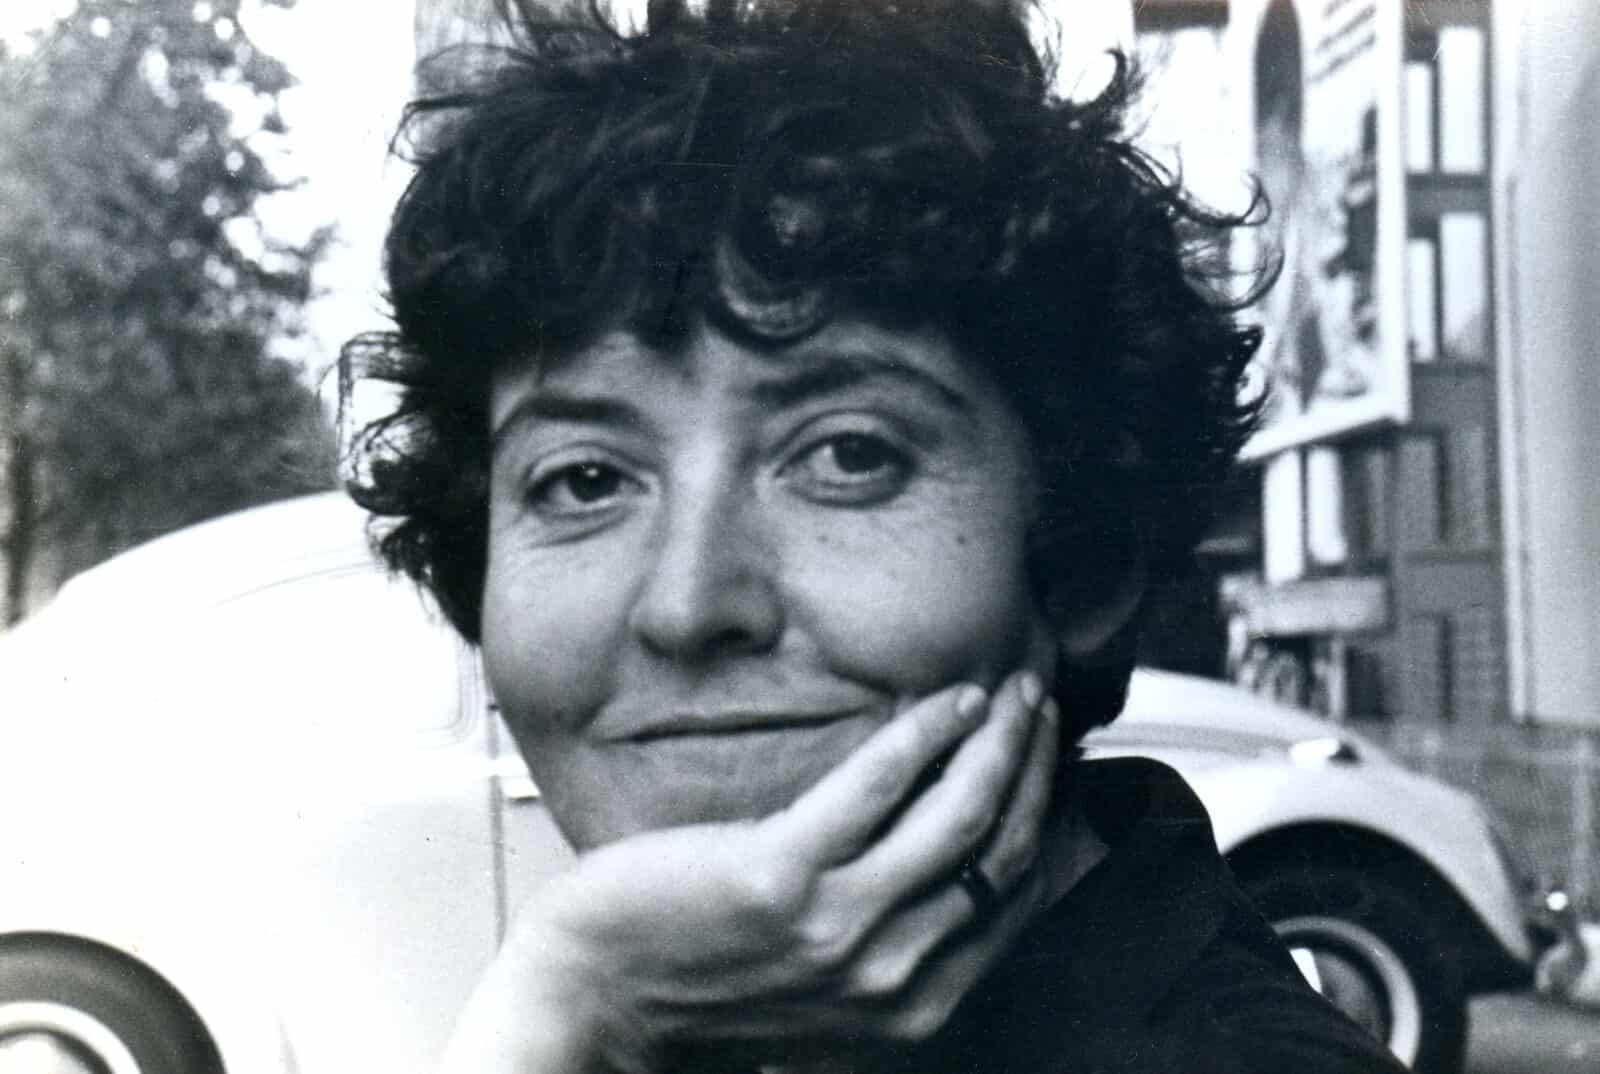 Maria Irene Fornés rests her chin on her hand, smiling with wry mischief in a black and white photo in the 1970s. Photo by and courtesy of Marcella Matarese Scuderi and Michelle Memran and The Rest I Make Up